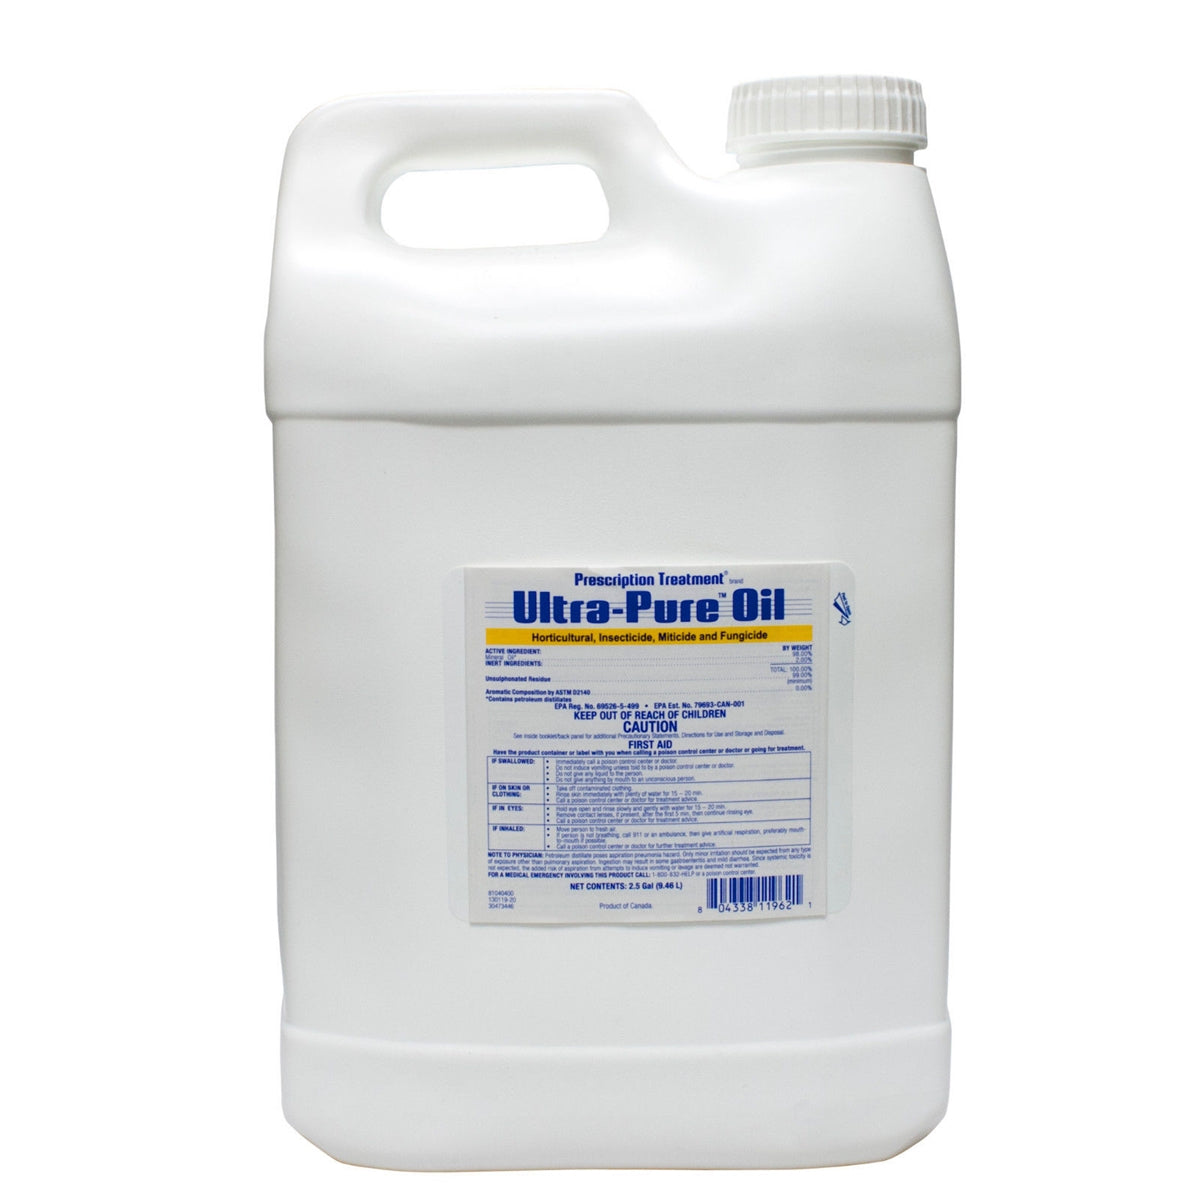 Ultra Pure Oil Horticultural Insecticide - 2.5 Gallons